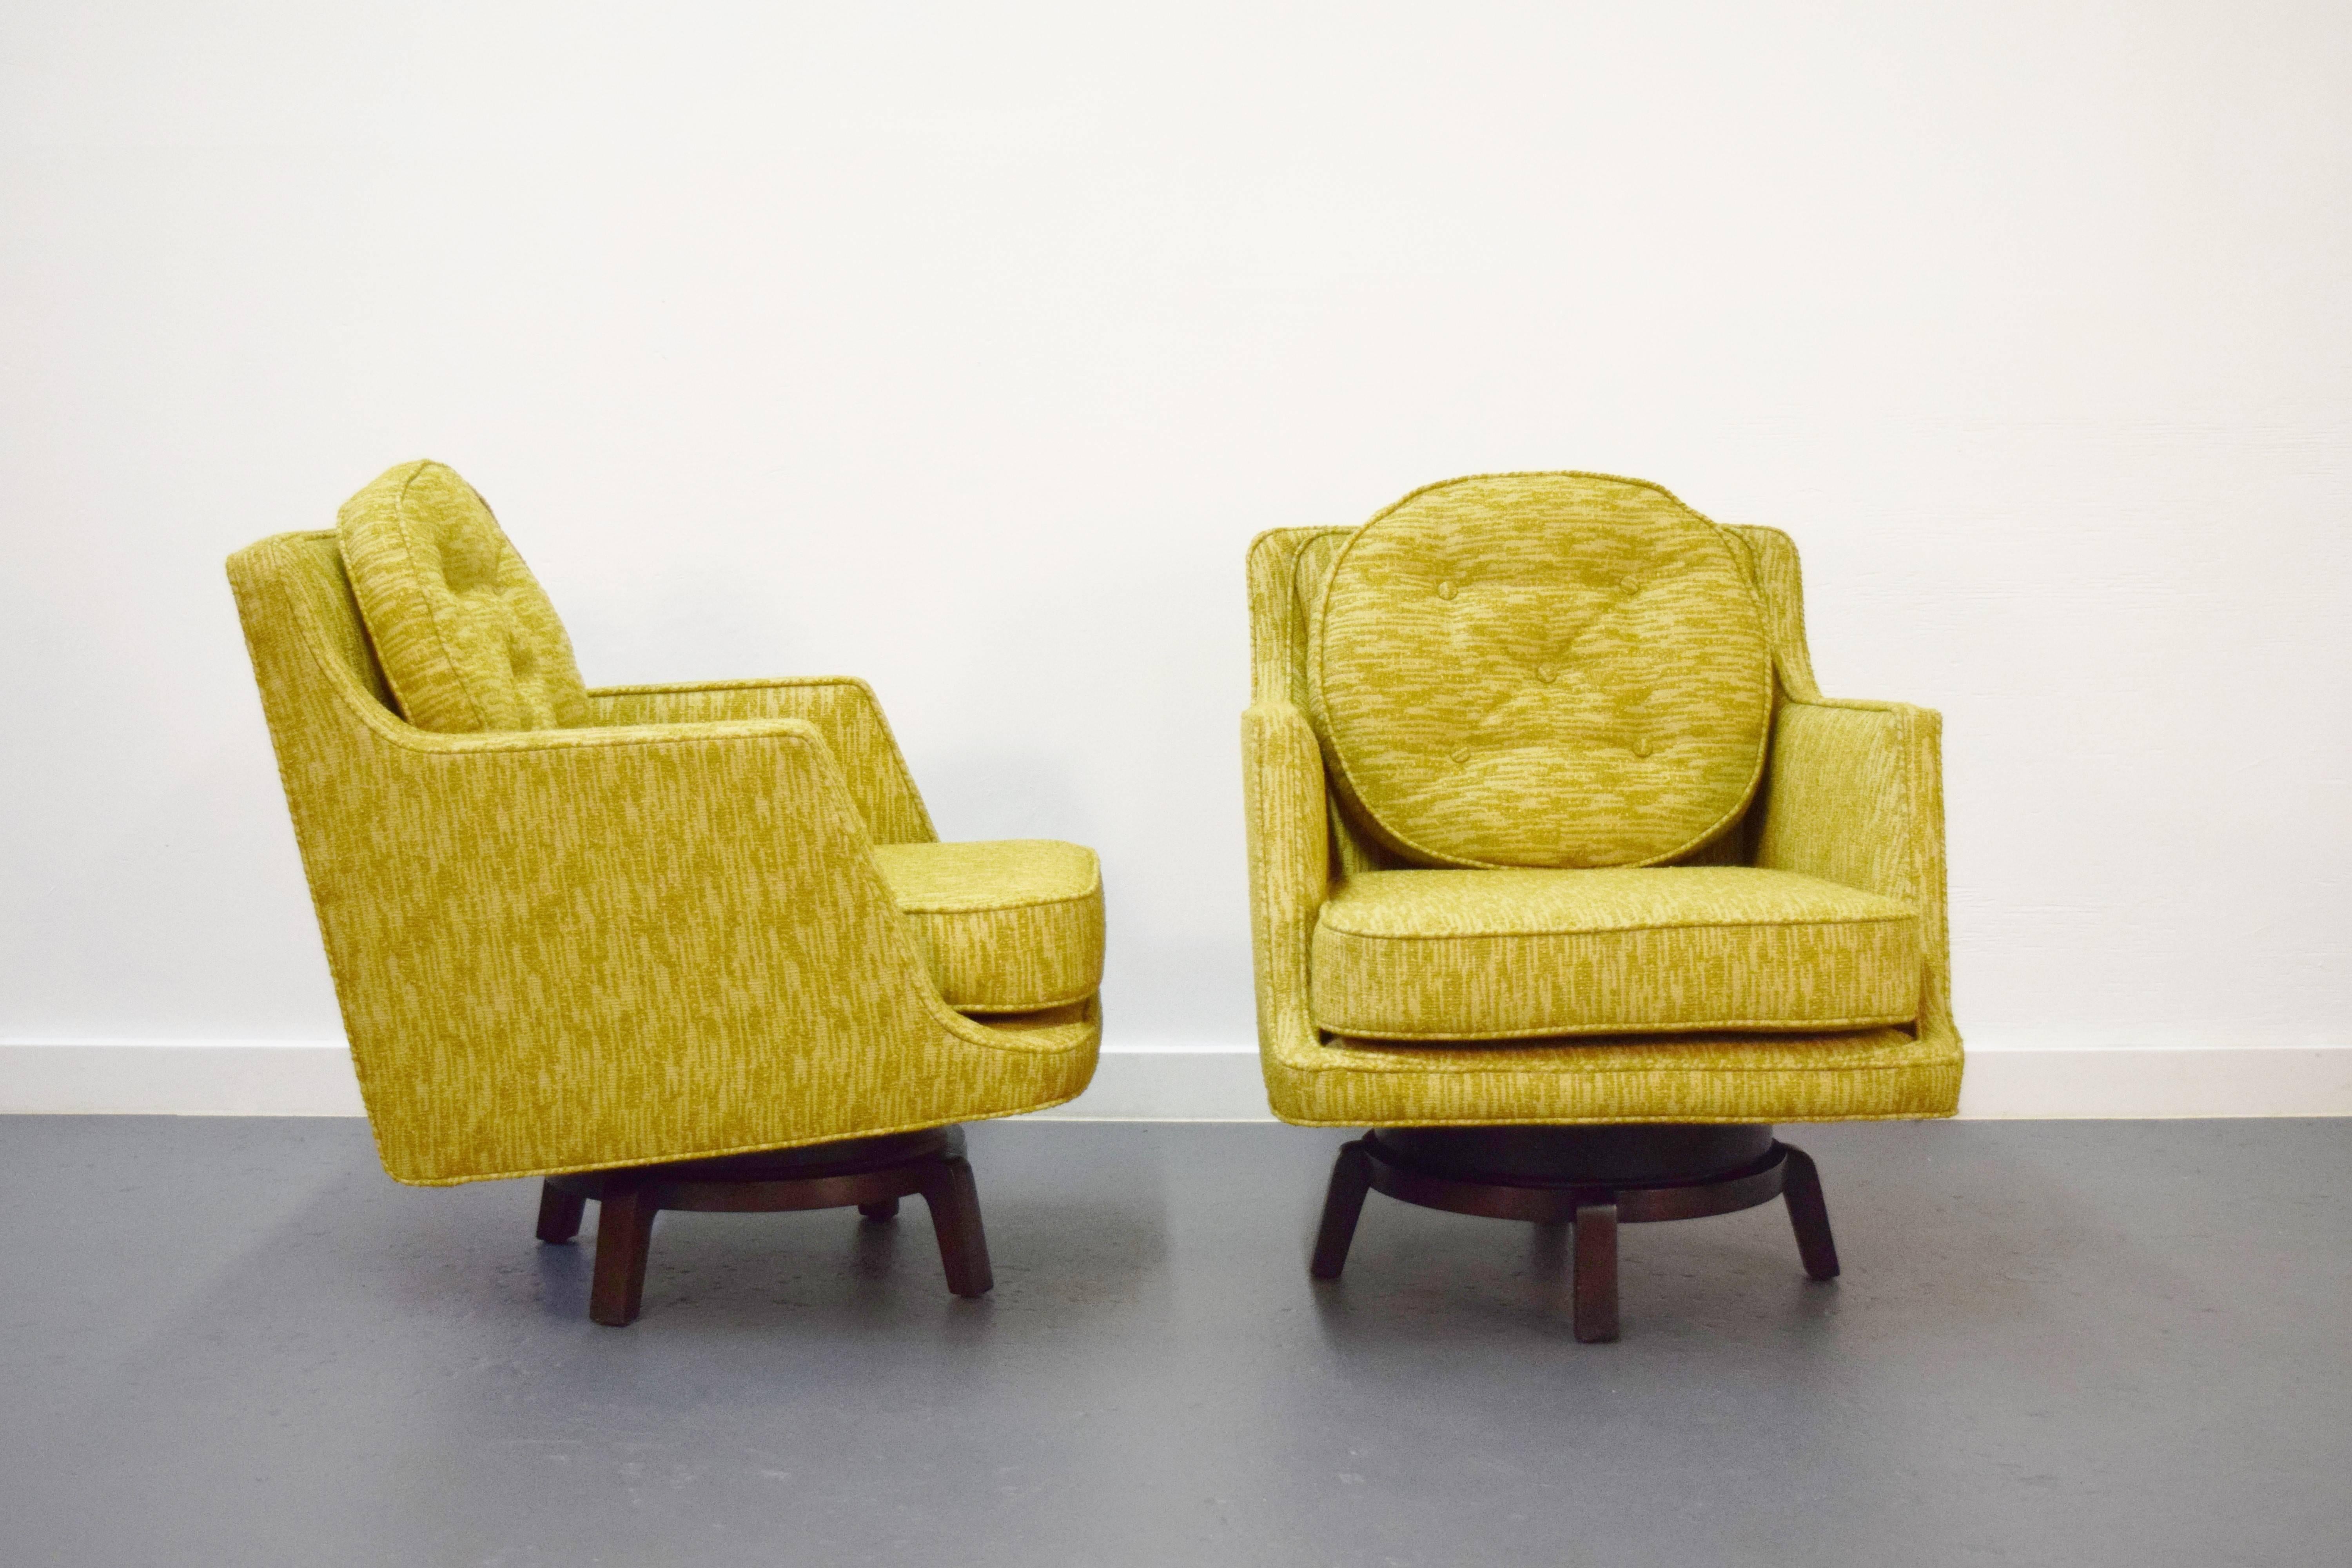 Pair of Edward Wormley swivel lounge chairs for Dunbar.